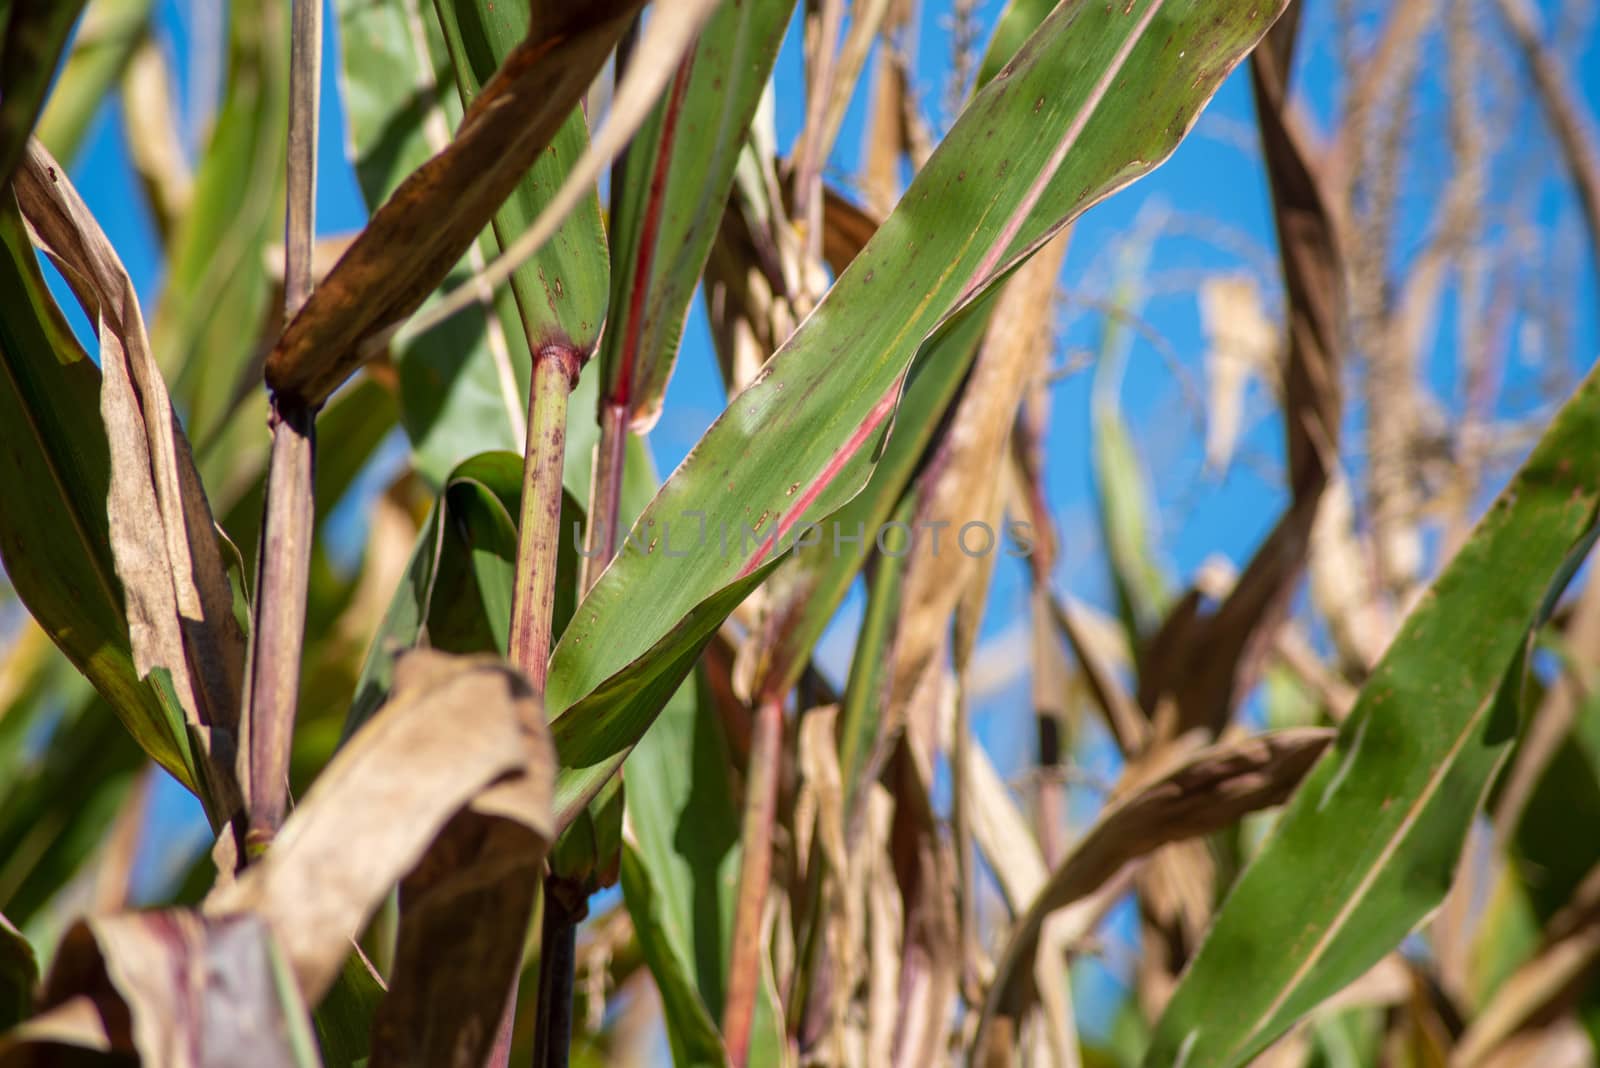 Full frame close up in natural light of green corn stalk leaves and stem with red veins and coloration. Defocused sunny background in agricultural field.